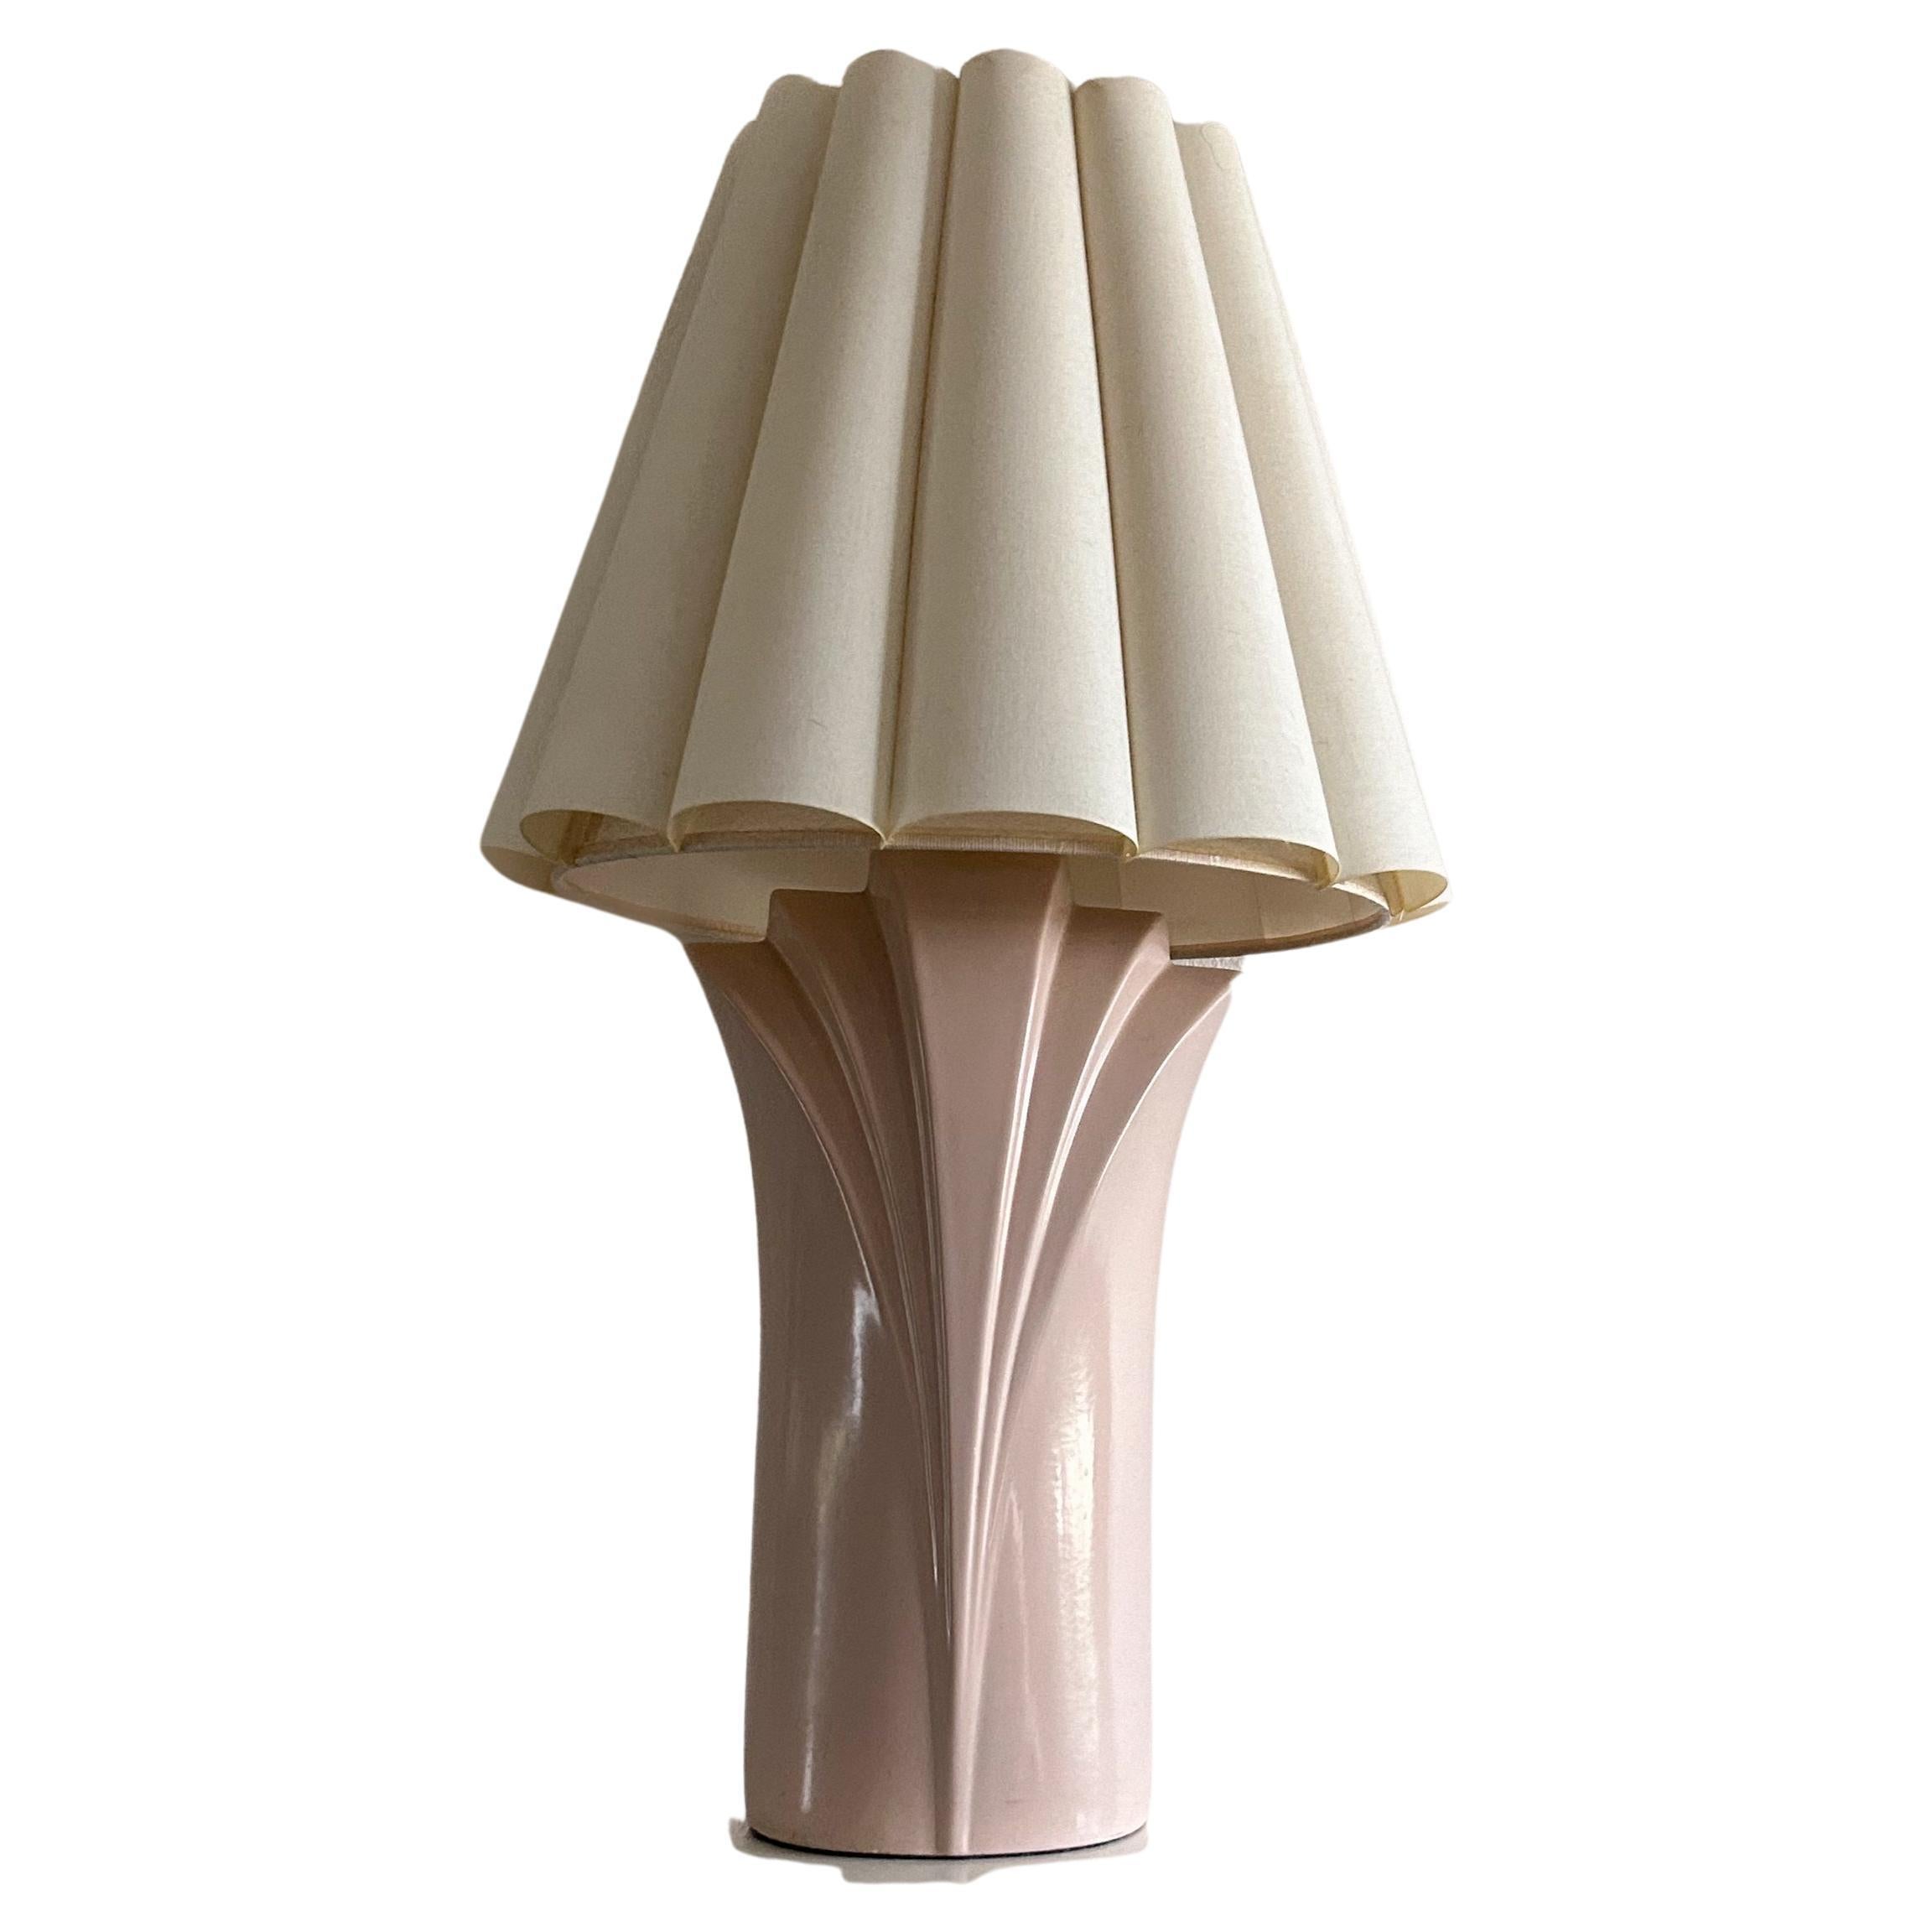 Cool Scalloped Table Lamp For Sale